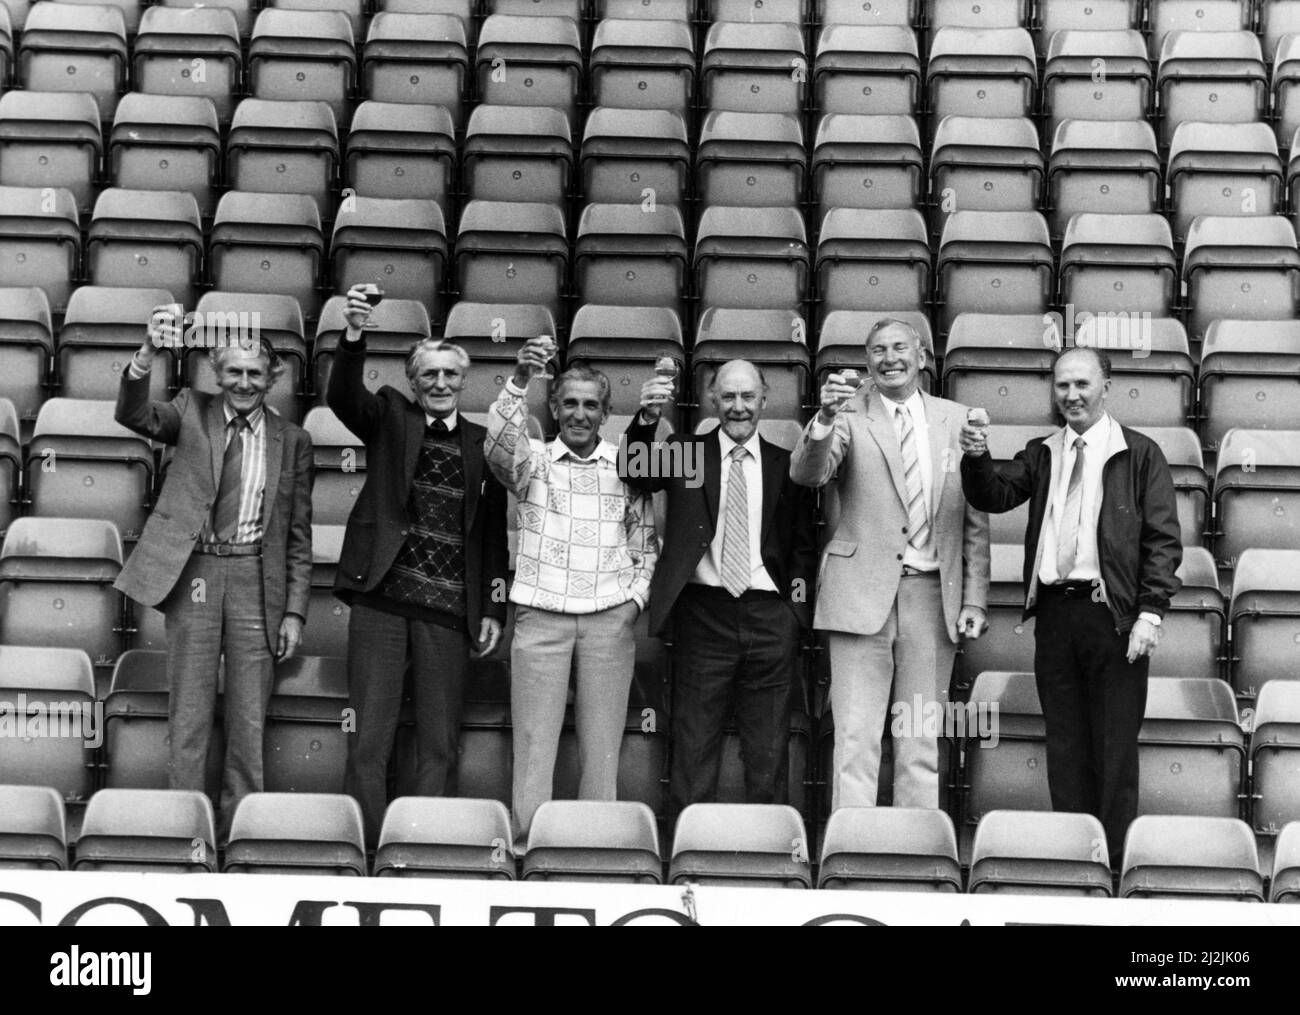 Raising their glasses are former Gateshead stars (left to right) Jacke Callender, Tommy Callender, Johnny Ingham, Ken Smith, Bob Gray and Johnny Campbell. 19th August 1988. Stock Photo